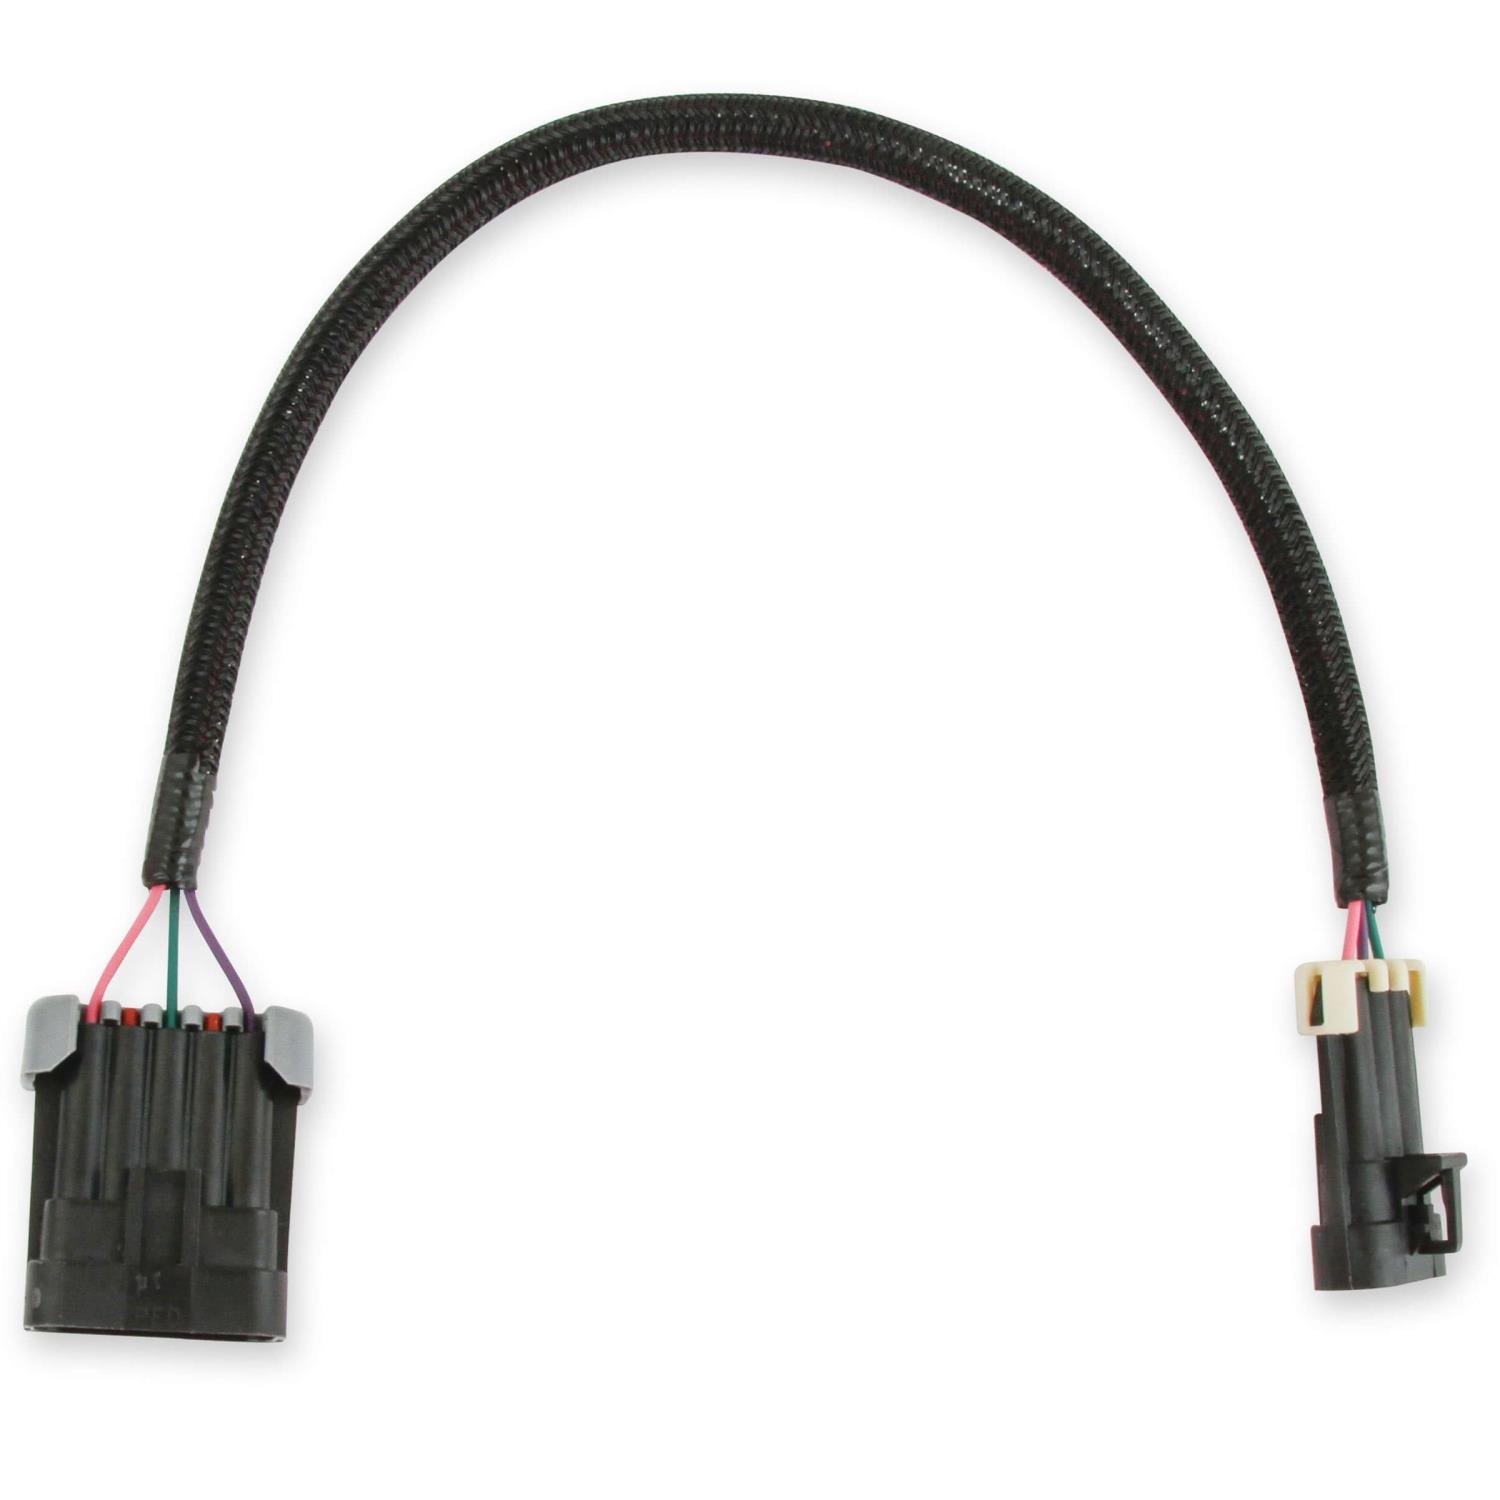 HyperSpark Ignition Adapter Harness